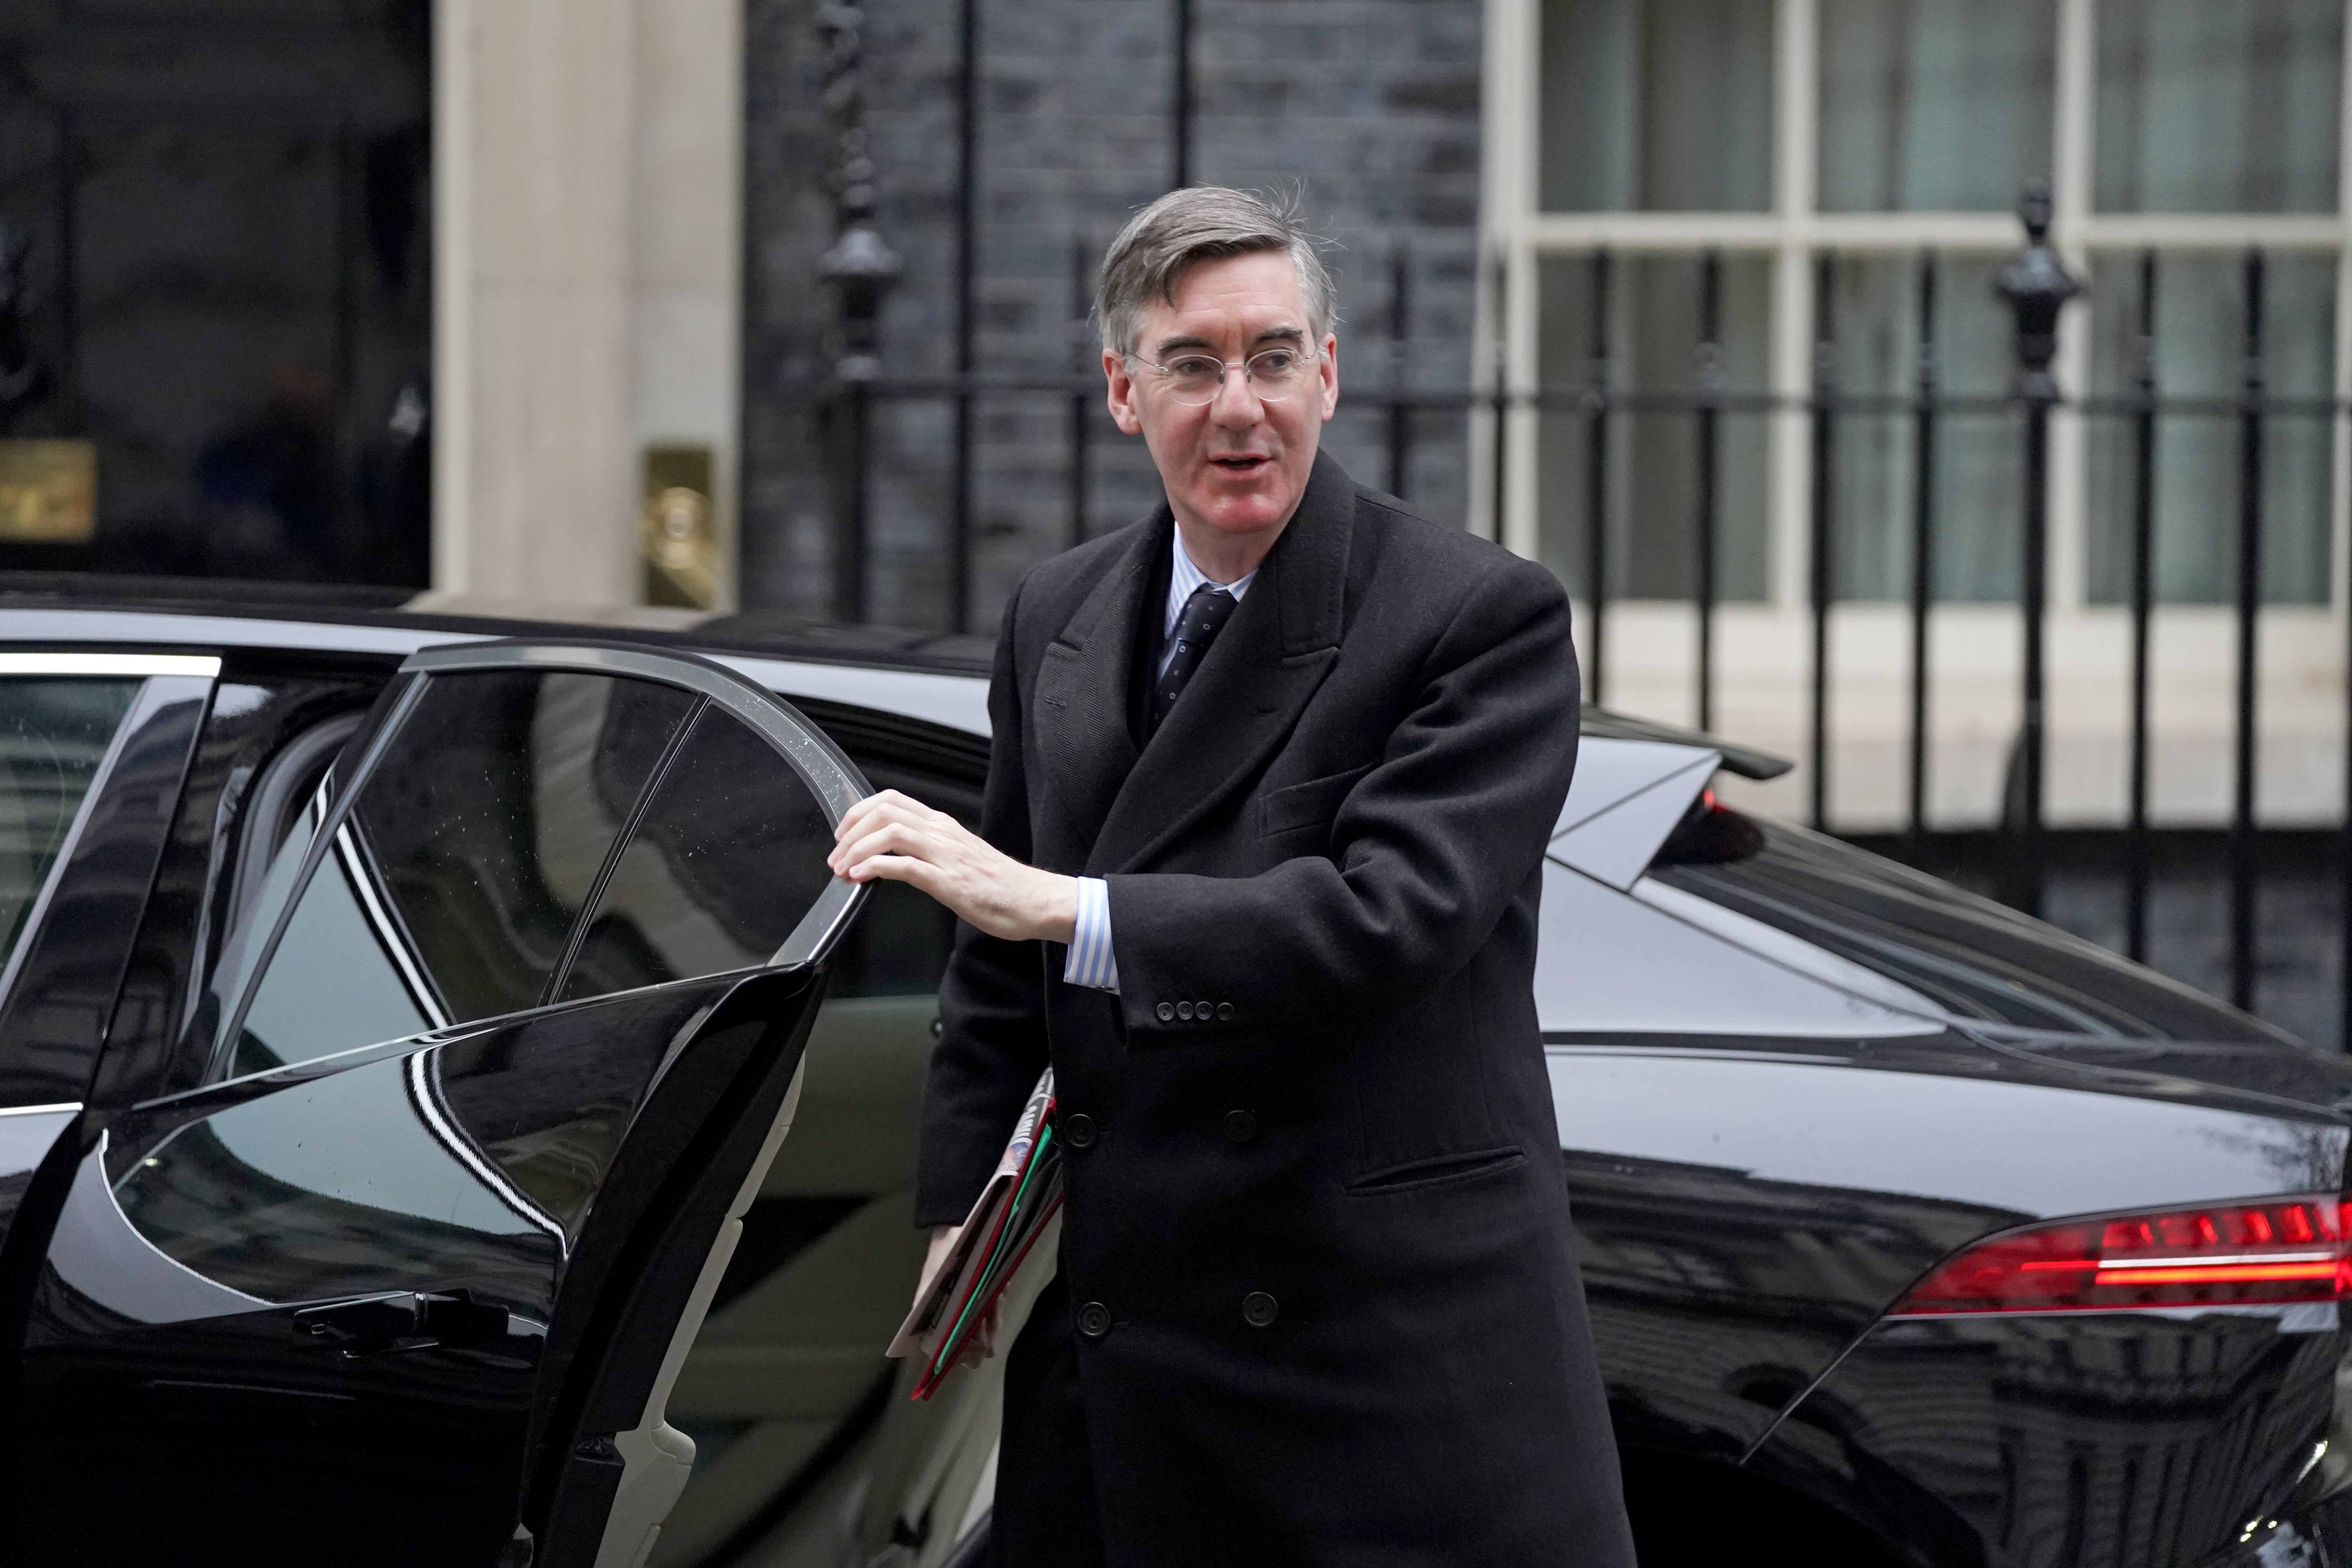 Jacob Rees-Mogg suggested any attempt to remove Boris Johnson from Downing Street should lead to a general election